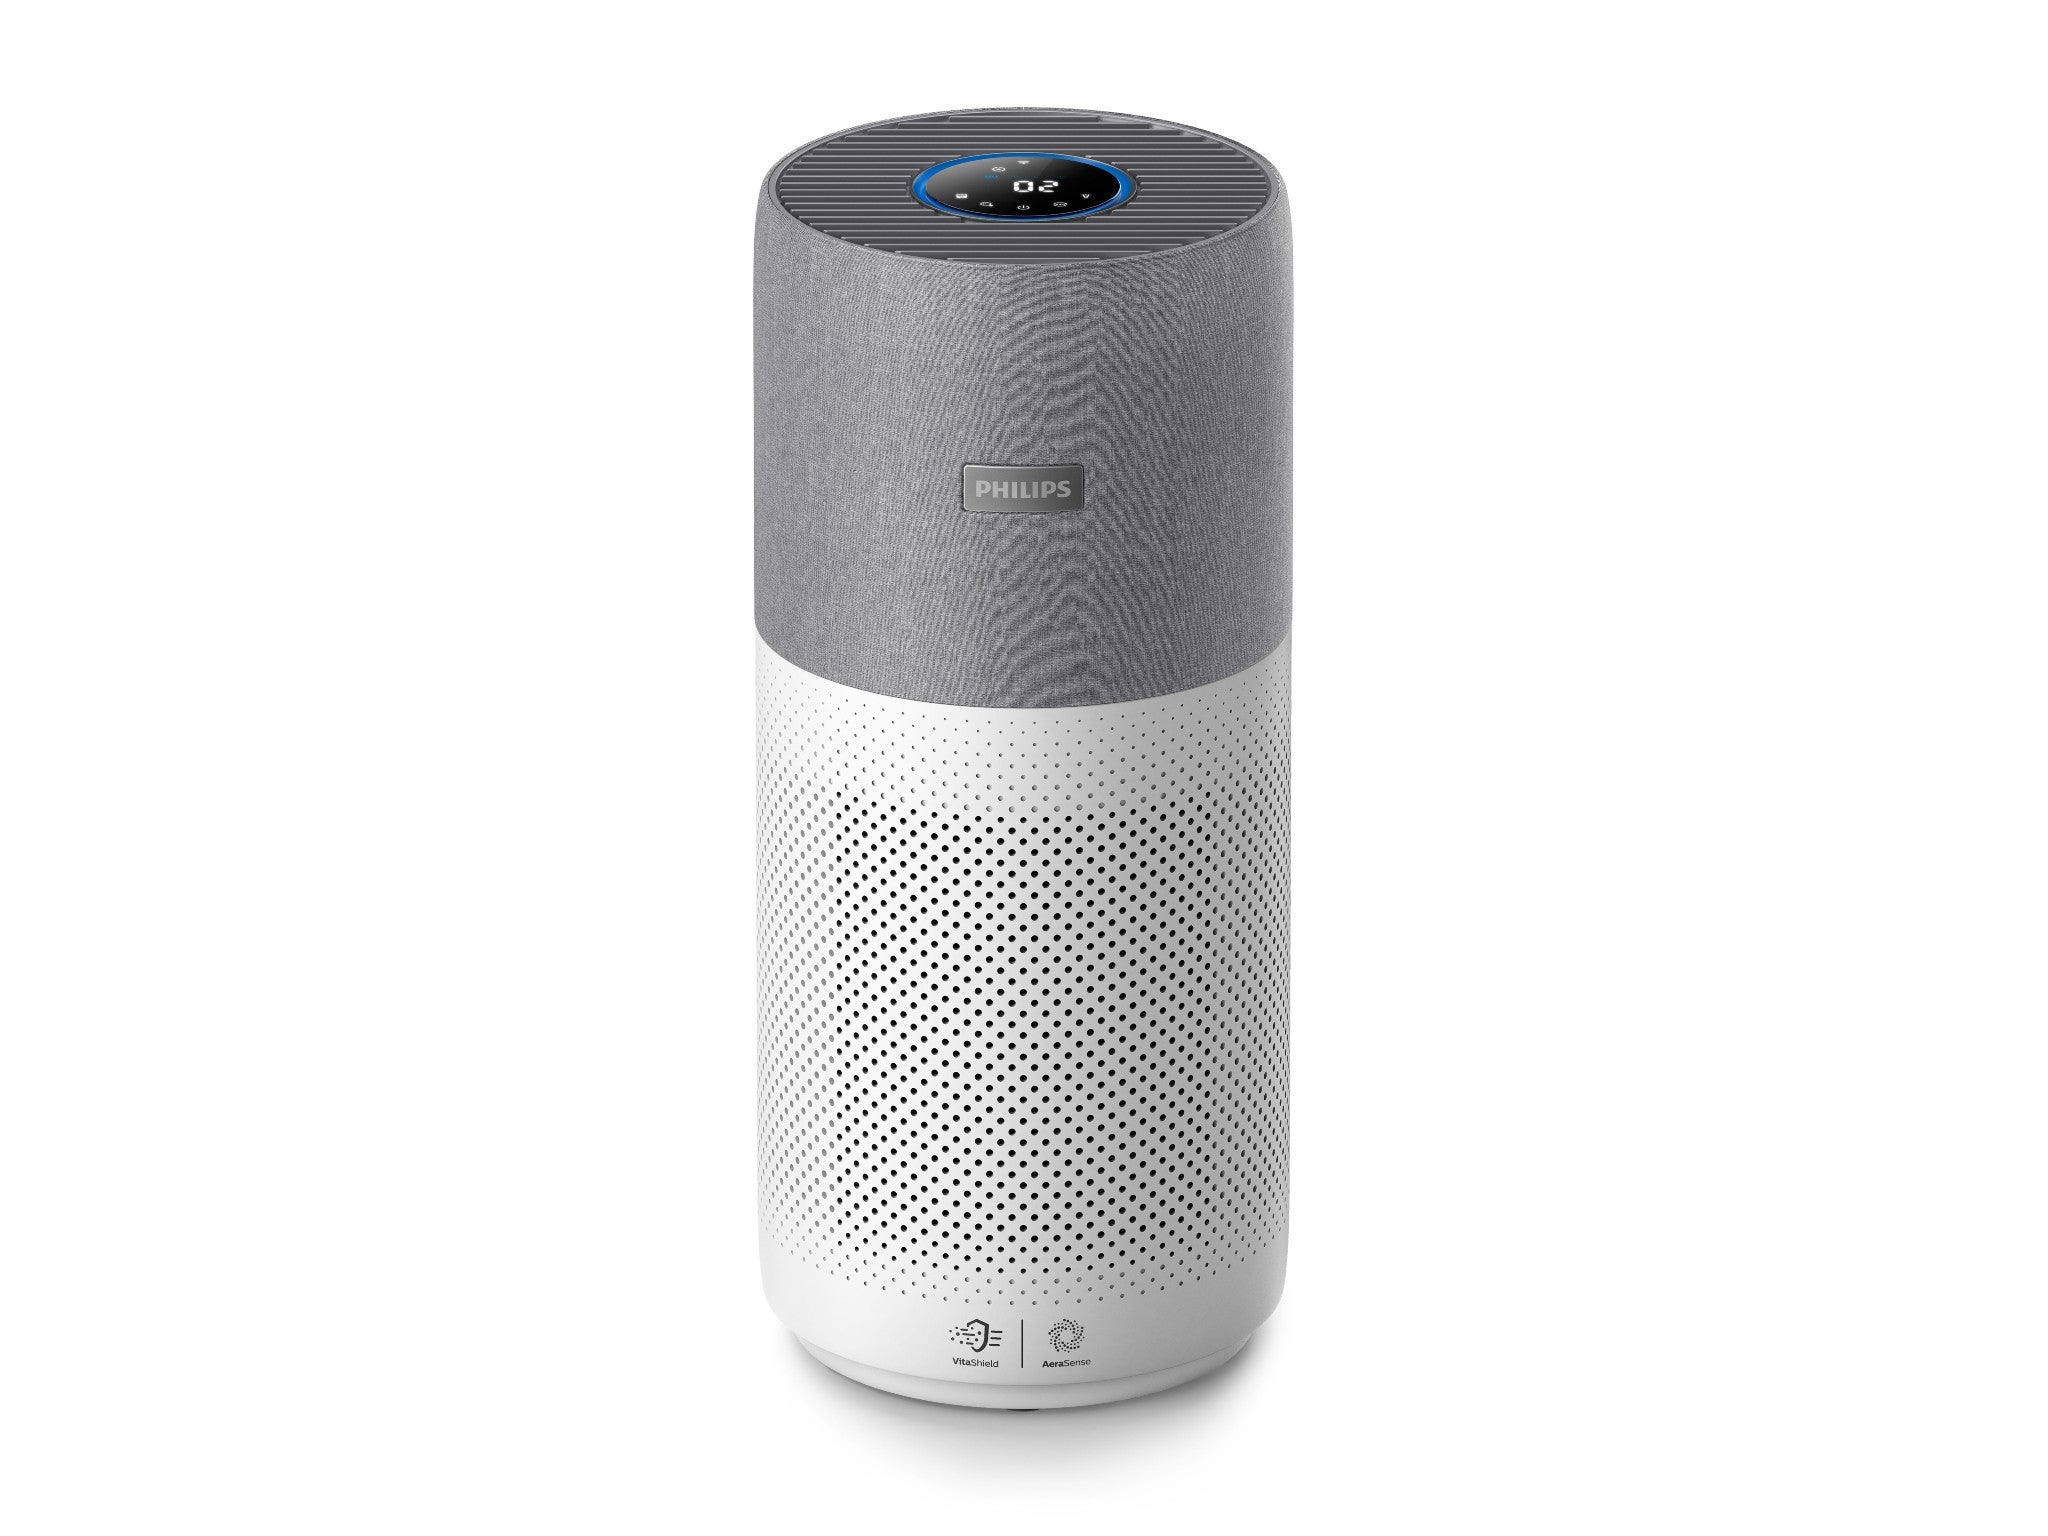 Philips AC3033:30 air purifier 3000i series indybest